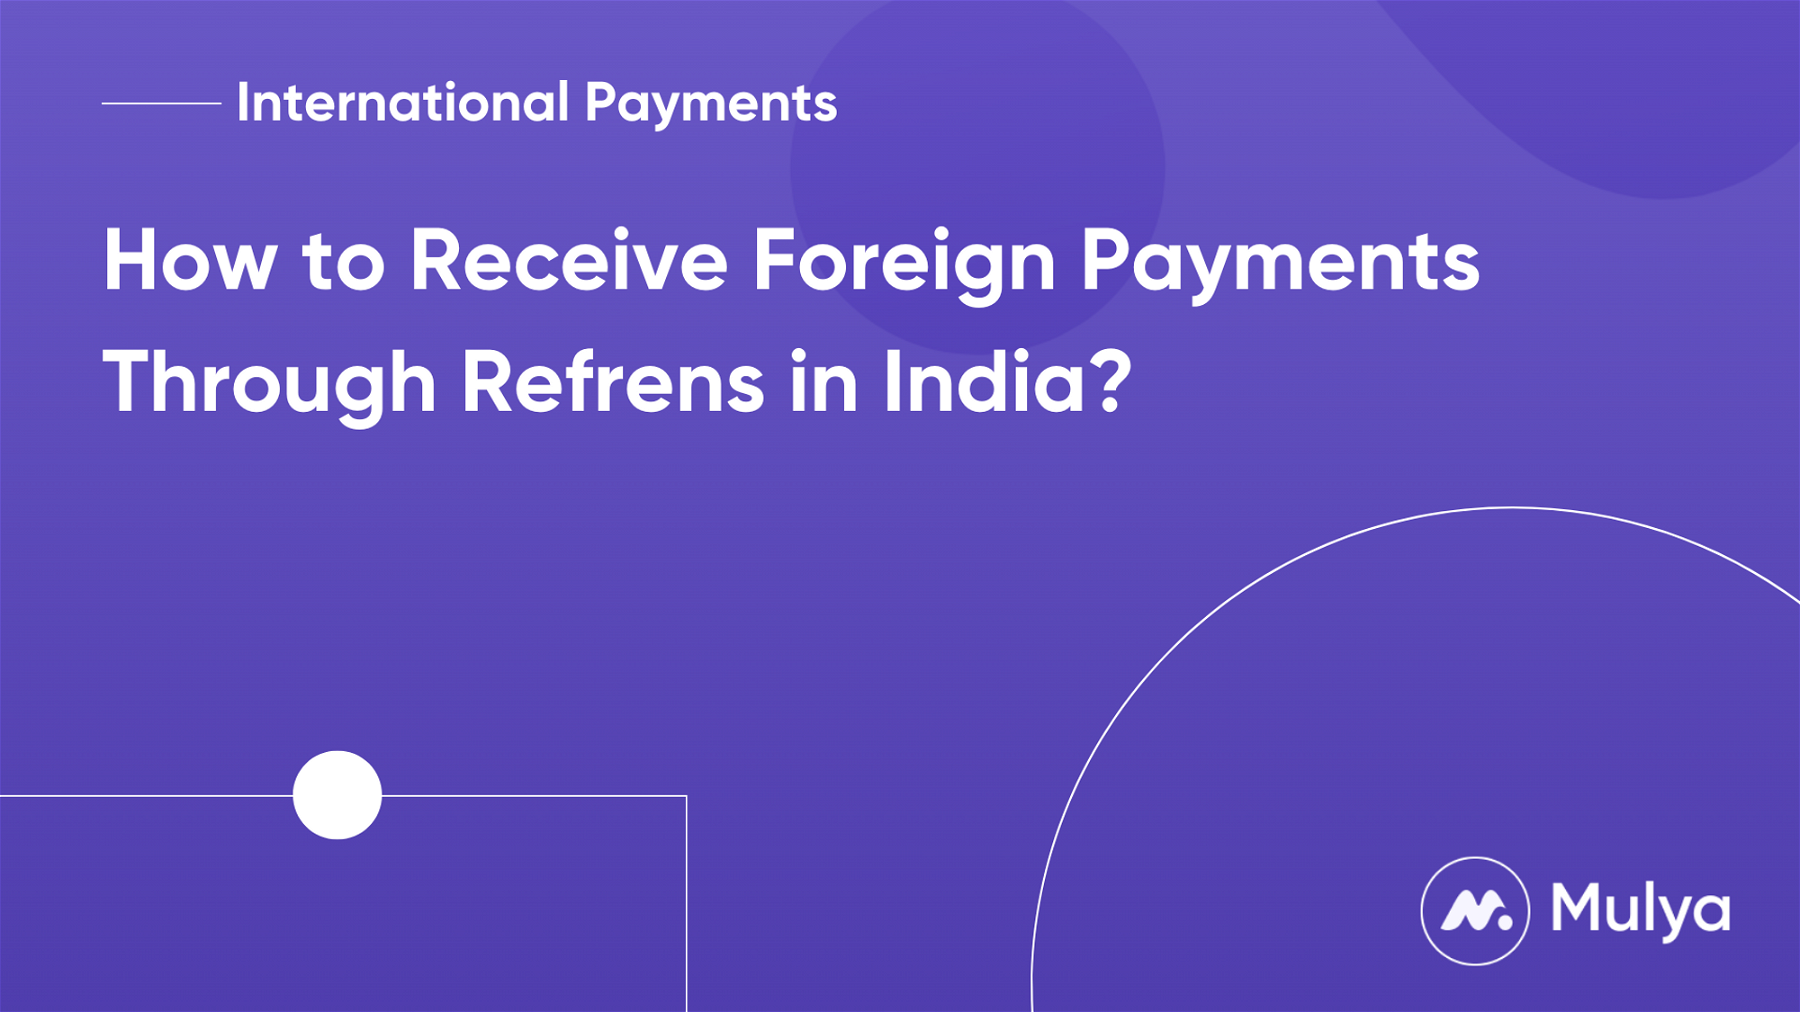 How to Receive Foreign Payments Through Refrens in India?